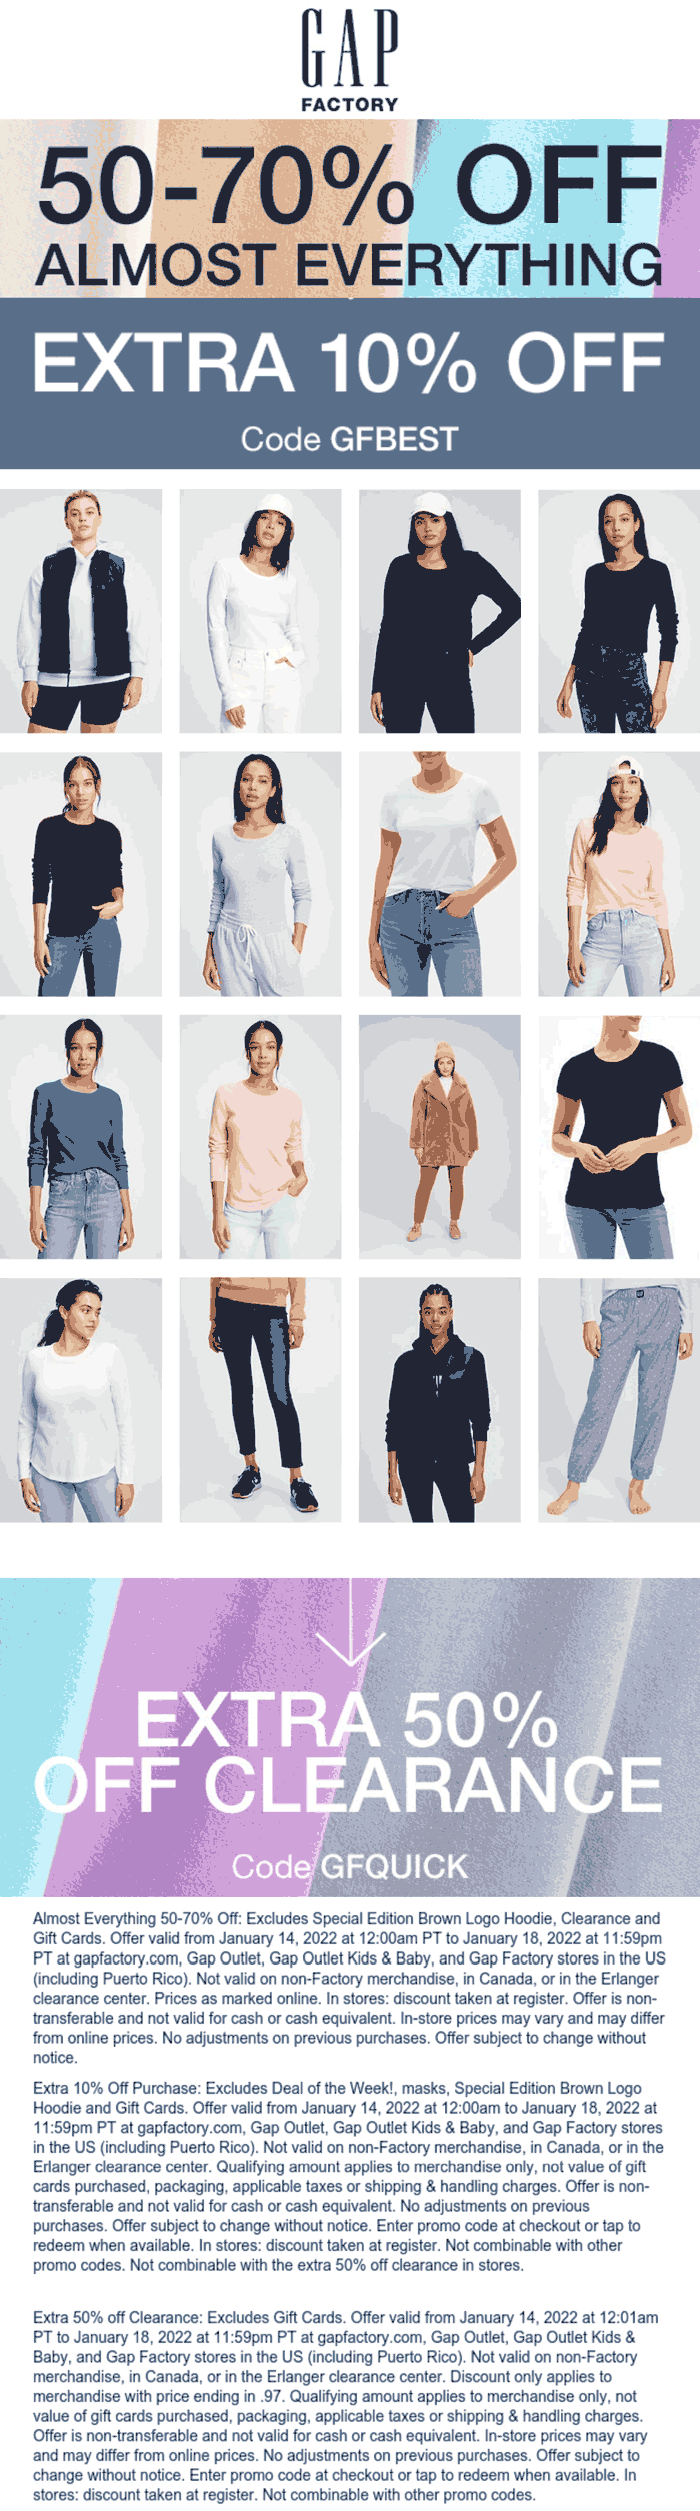 Gap Factory stores Coupon  60-80% off at Gap Factory, or online via promo code GFBEST #gapfactory 